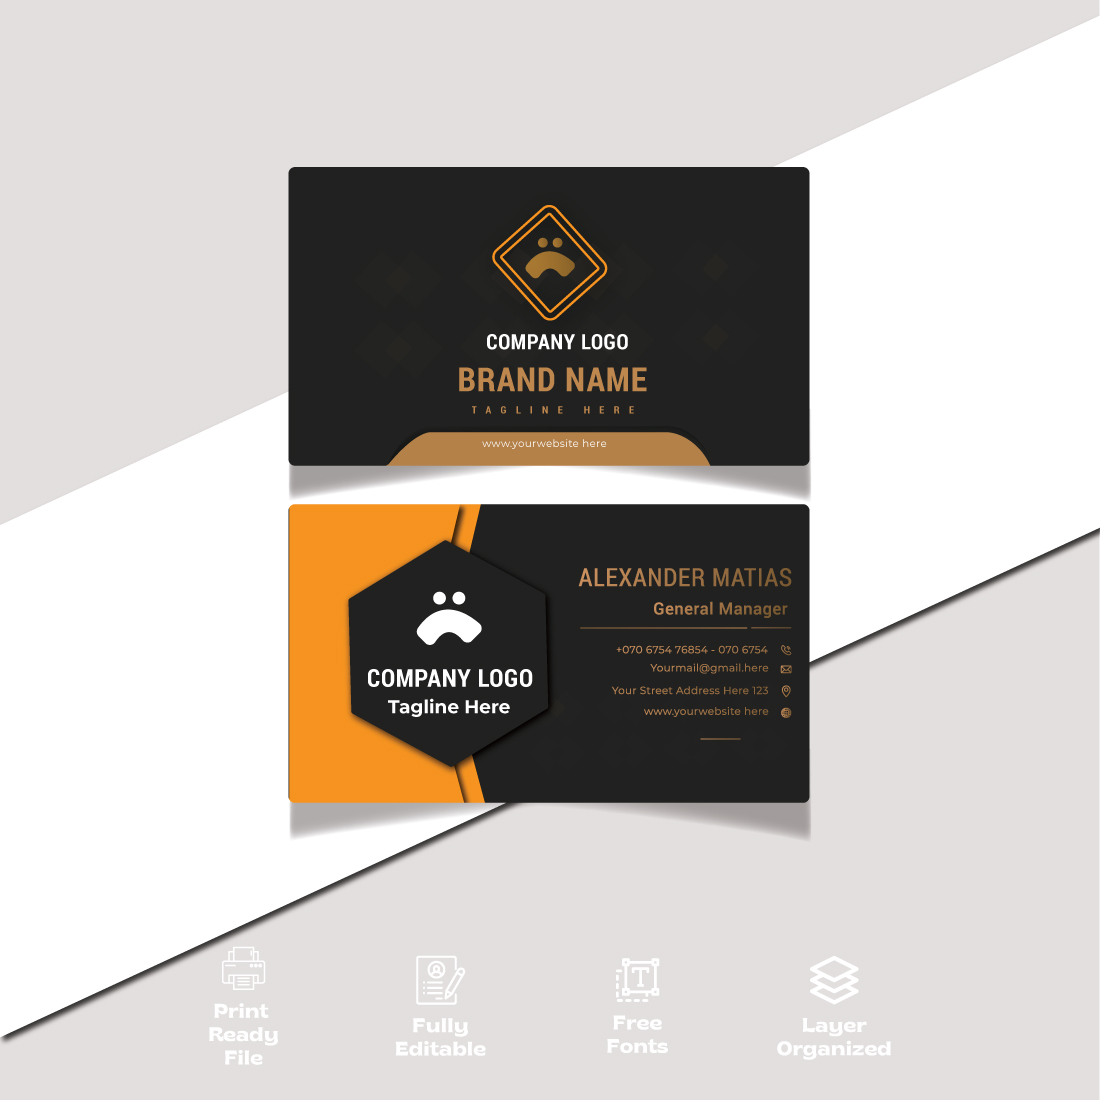 Minimal business card template layout Vector illustration Stationery design cover image.